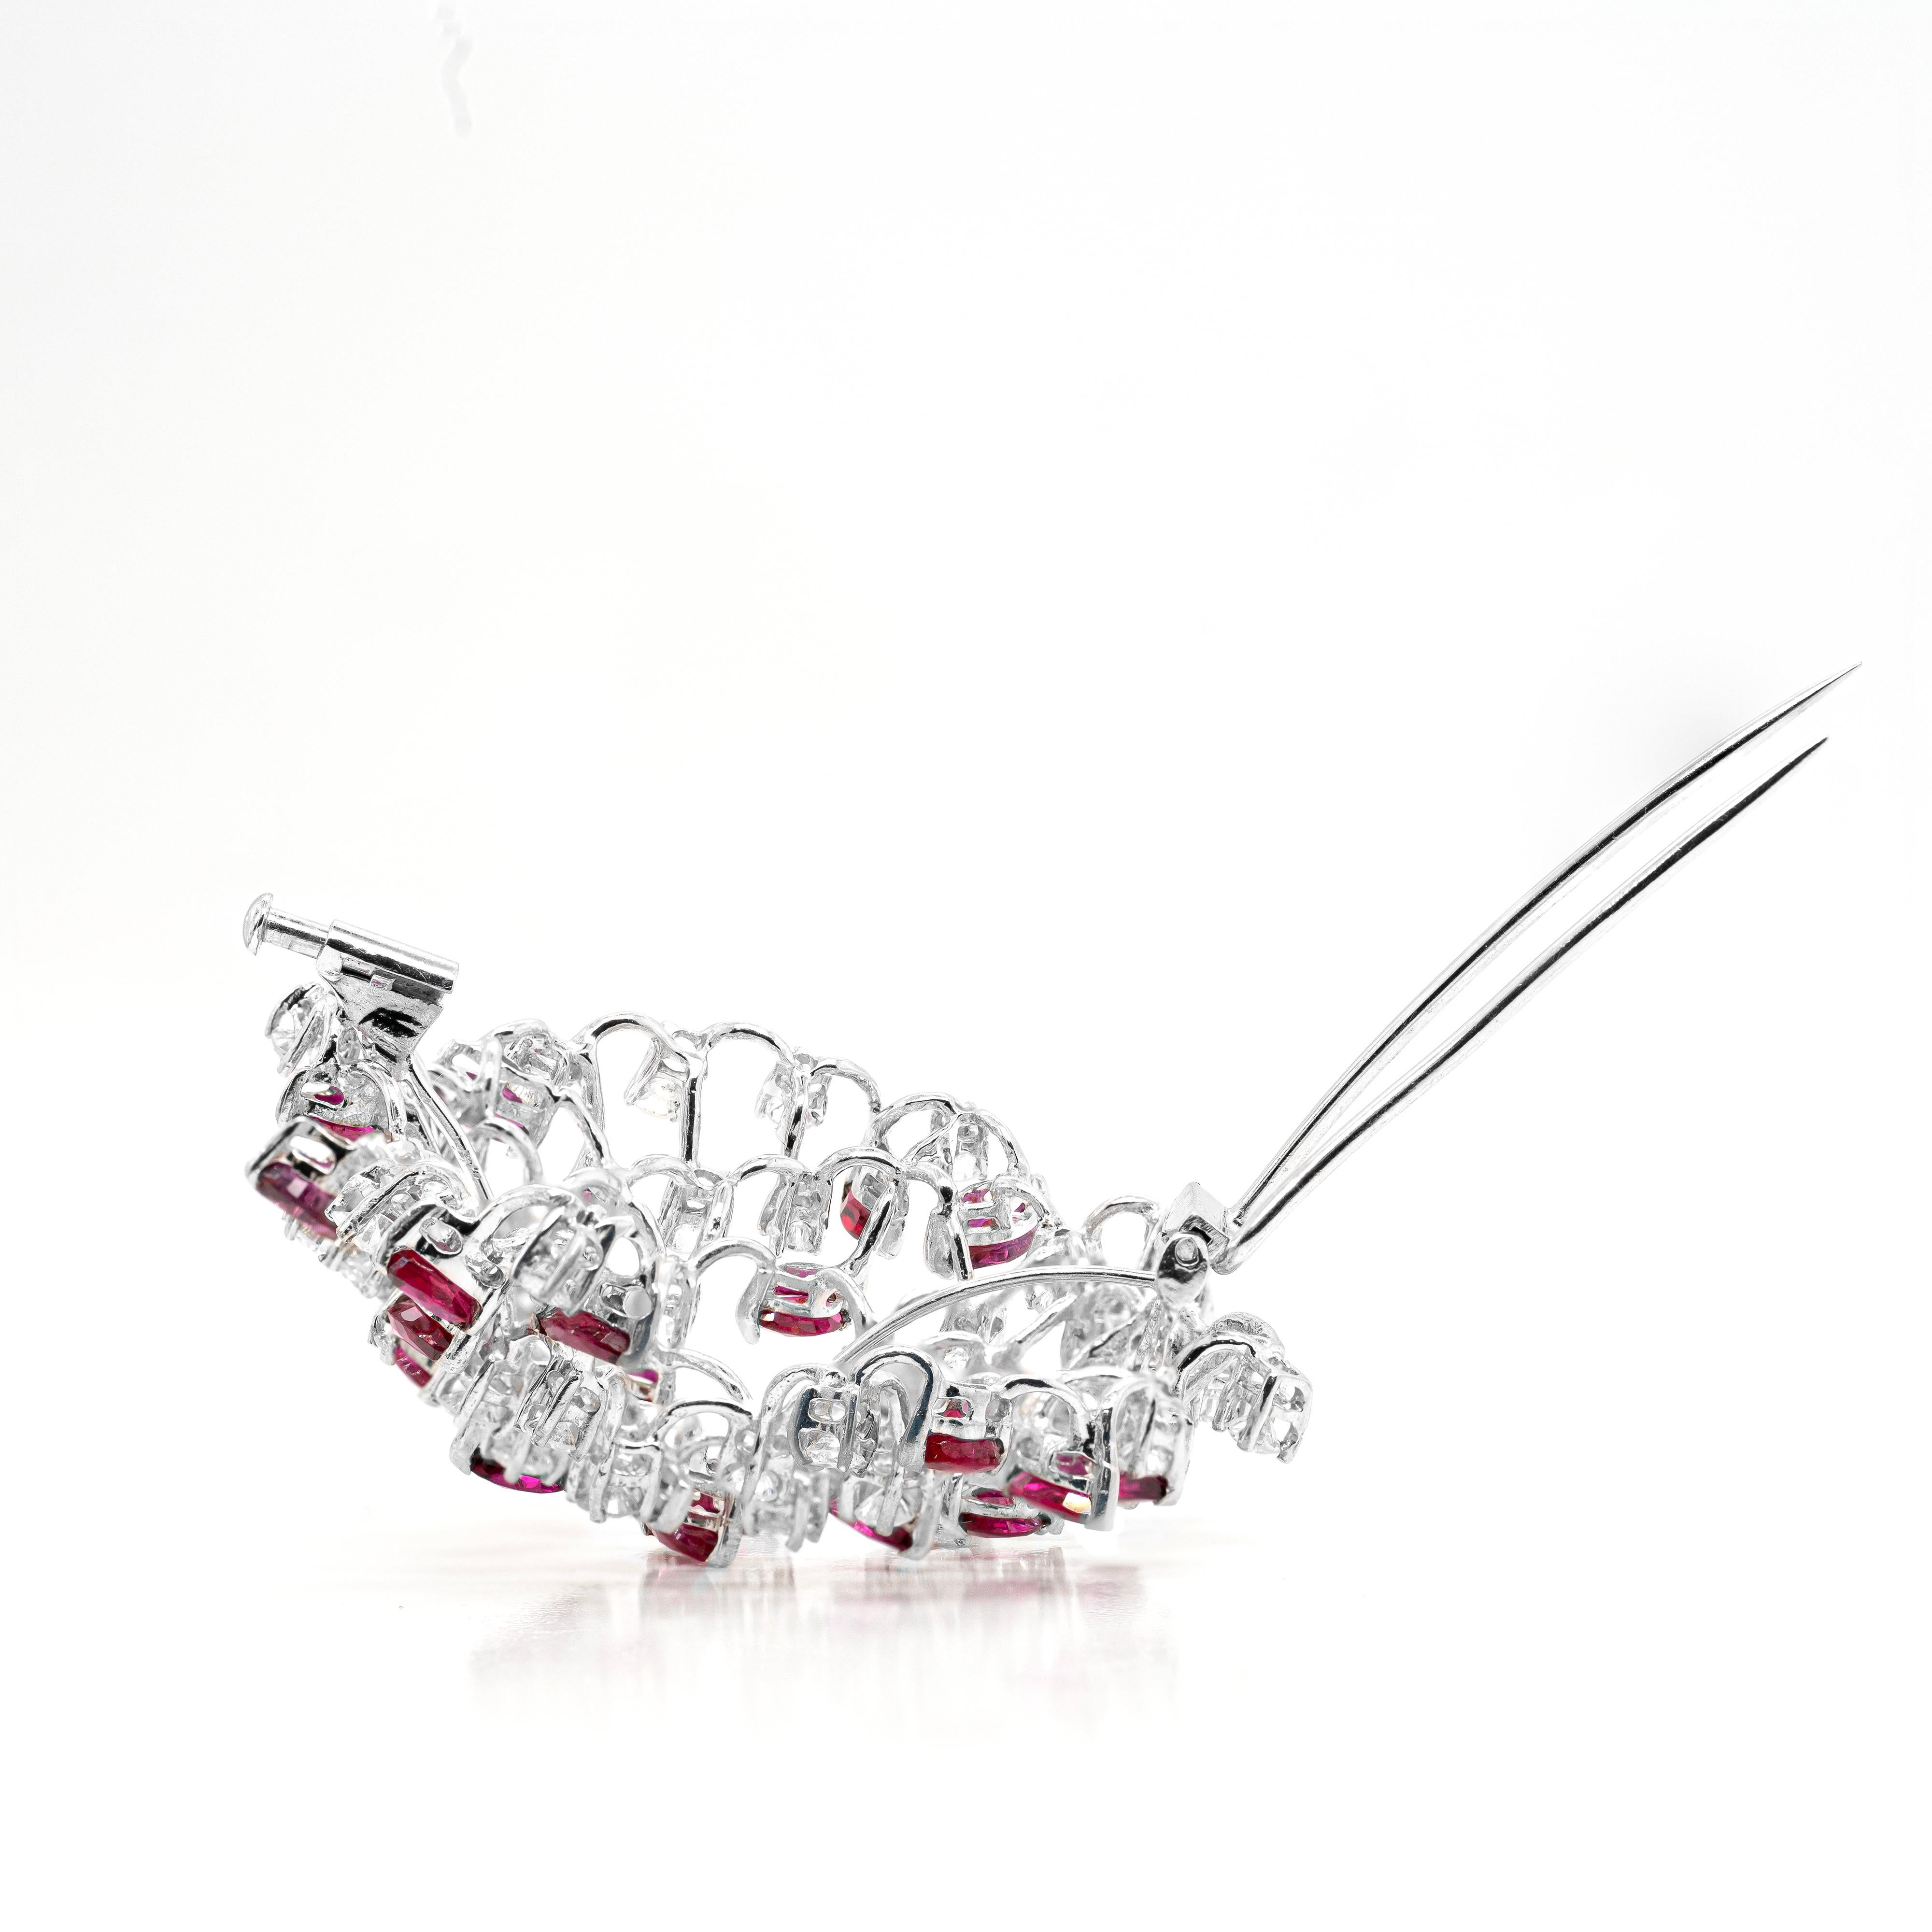 This wonderful one of a kind brooch is beautifully inlaid with a mix of 29 marquise shaped rubies and 36 high quality round brilliant cut diamonds spread throughout it among the vibrant rubies. All the stones are perfectly claw set on an 18 carat